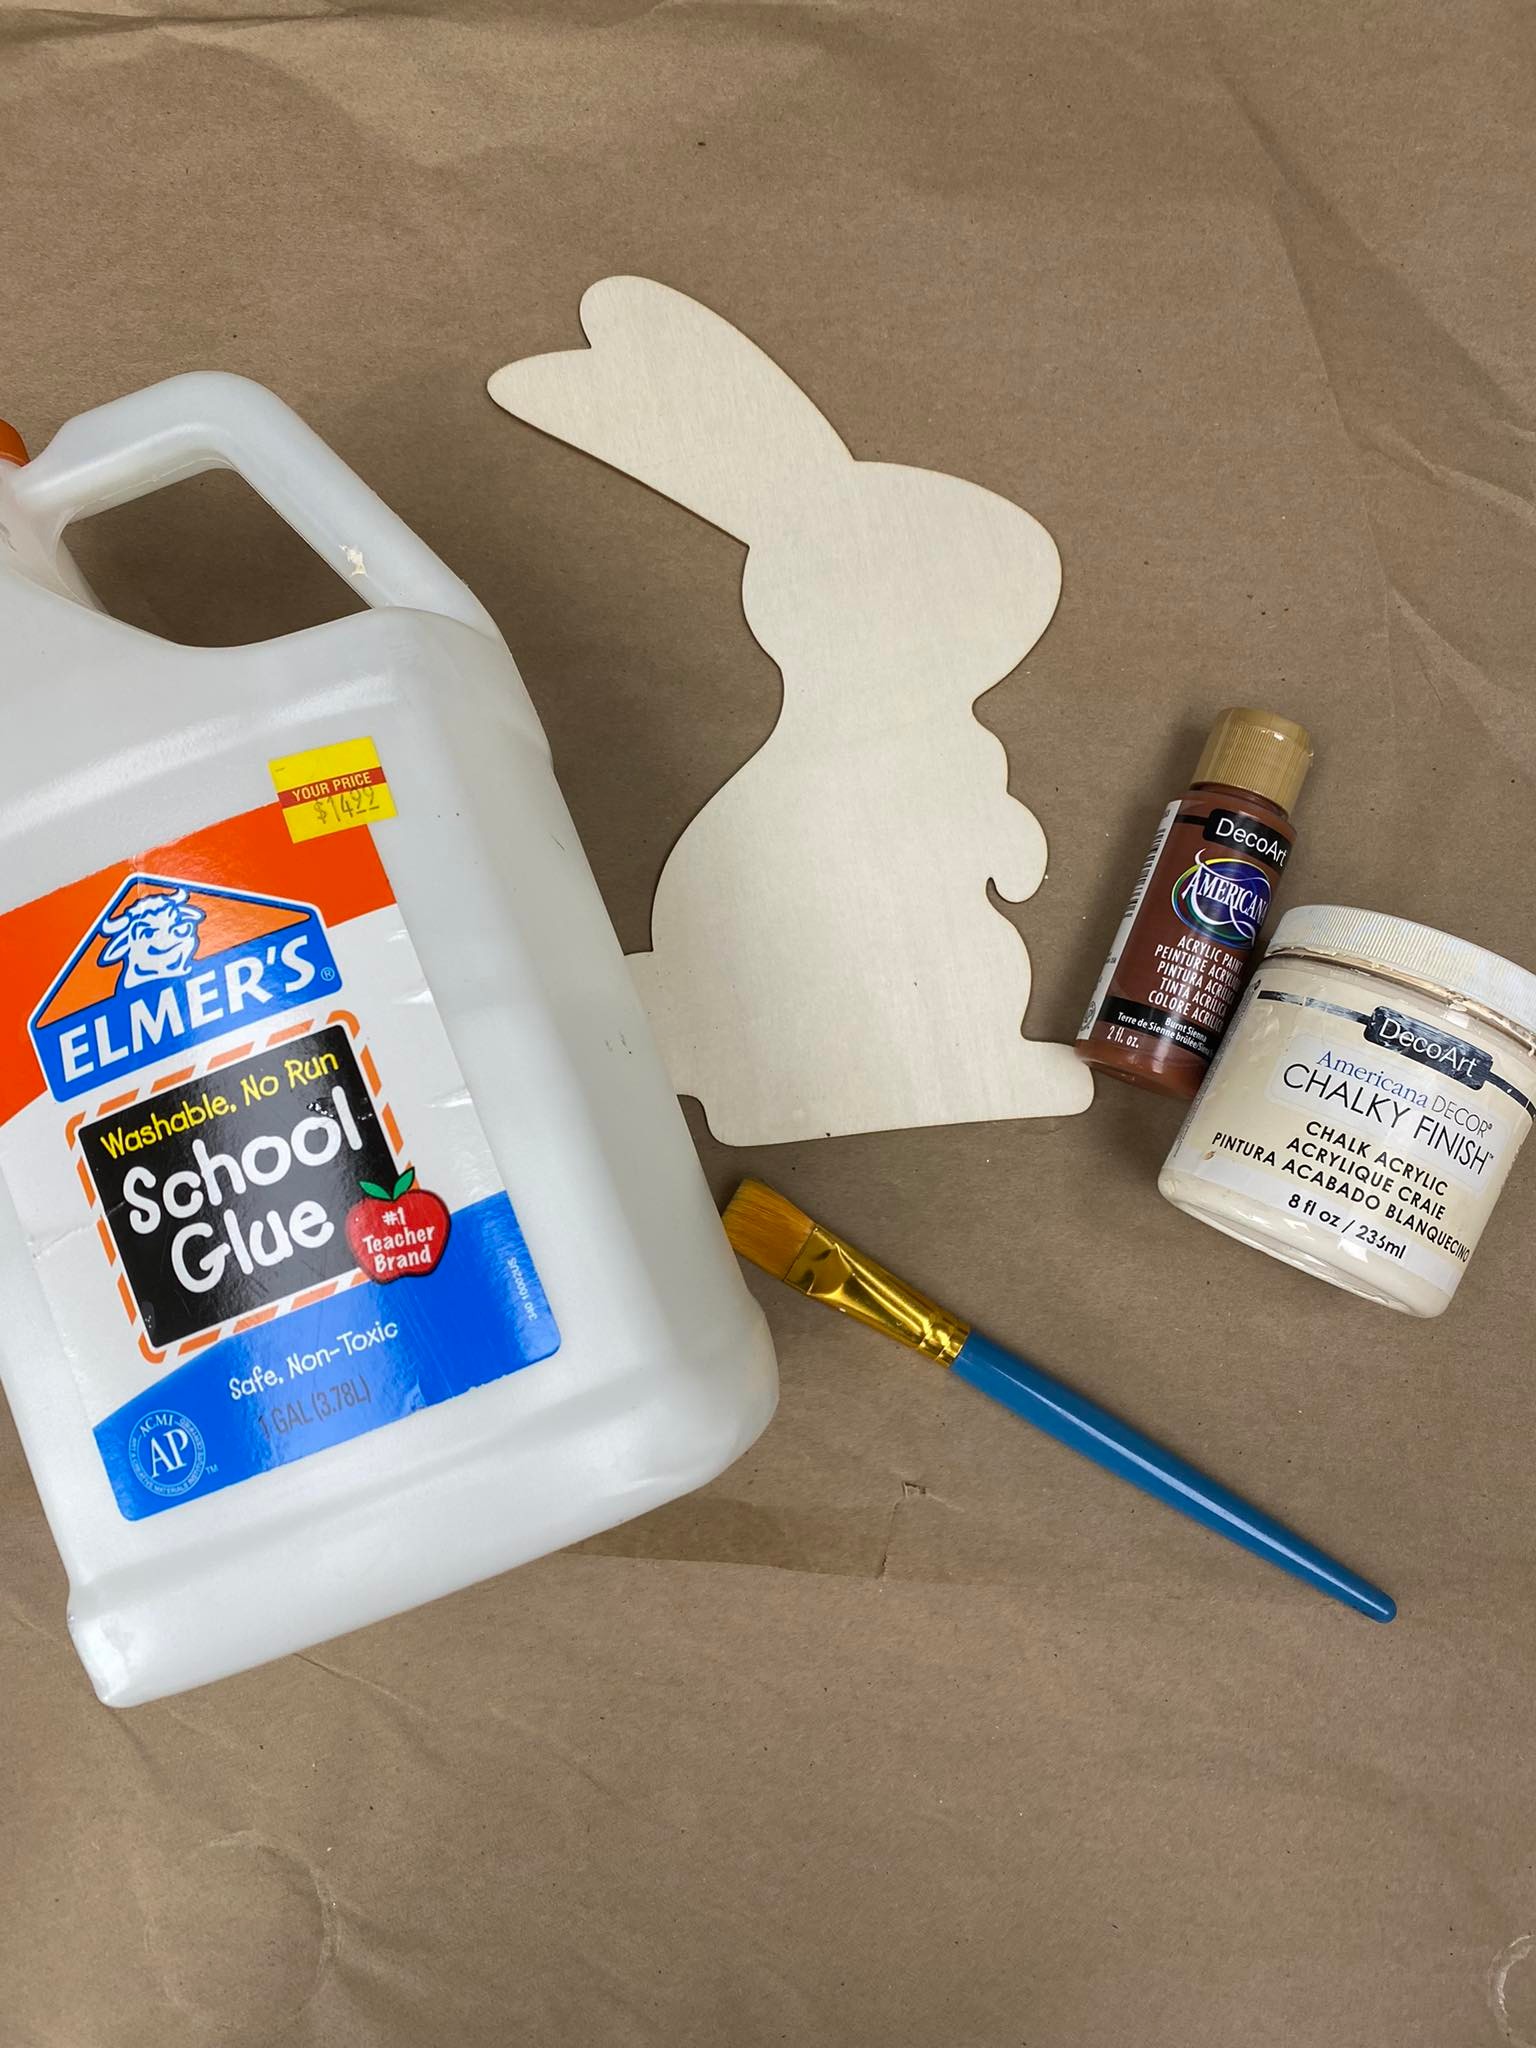 Make The Best of Things: Cheap Elmer's glue crackle chalkboard project